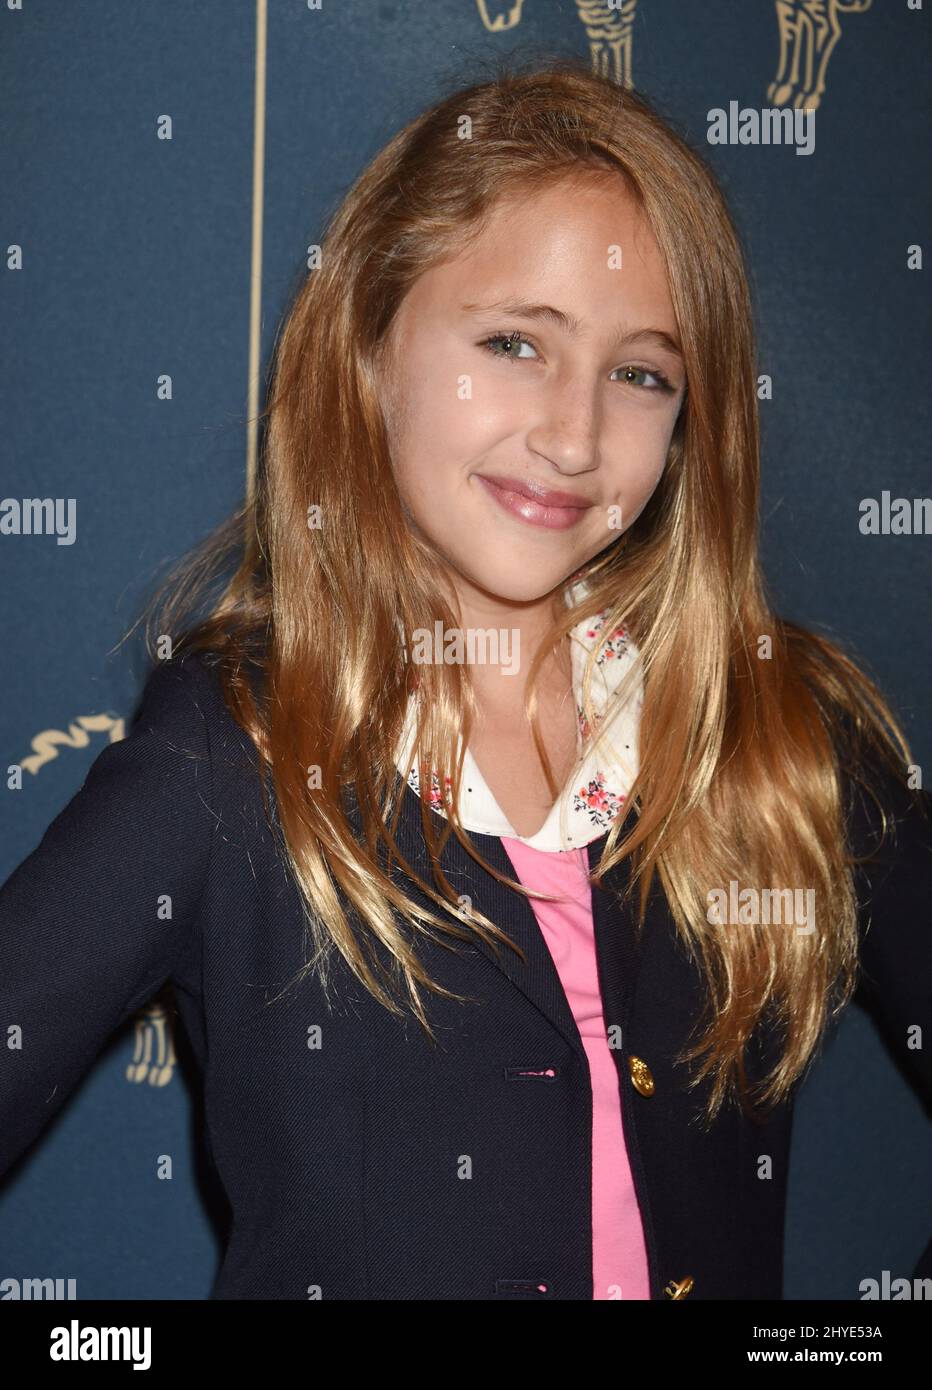 Ava Kolker attending the Brooks Brothers and St. Jude Annual Holiday Party held at the Brooks Brothers Rodeo Drive Store in Beverly Hills, CA. Stock Photo